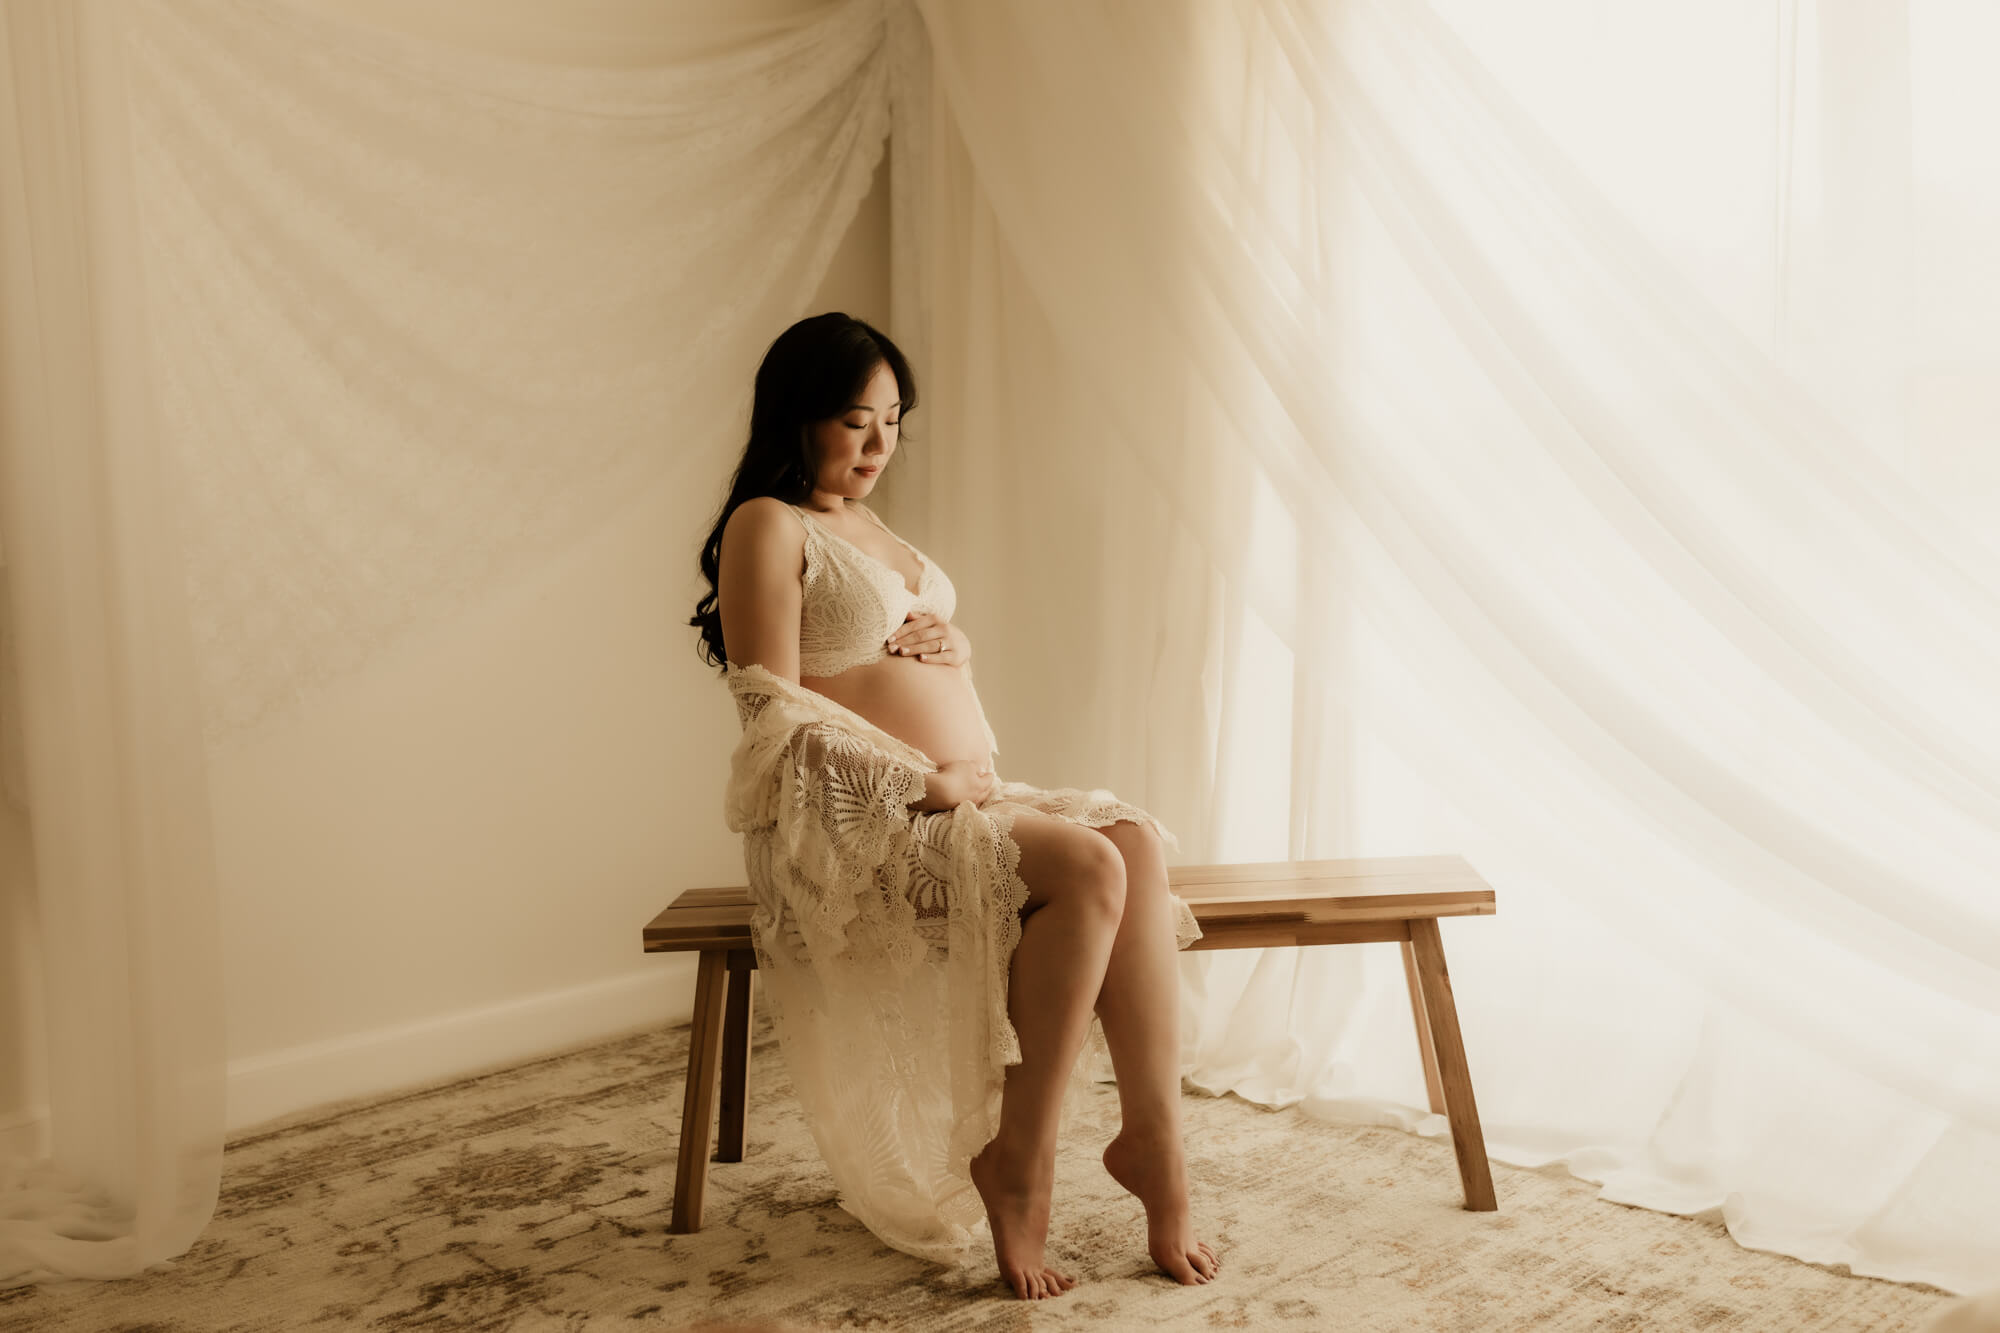 Expecting mother looking at her baby bump while sitting on a bench, prenatal massage okc.